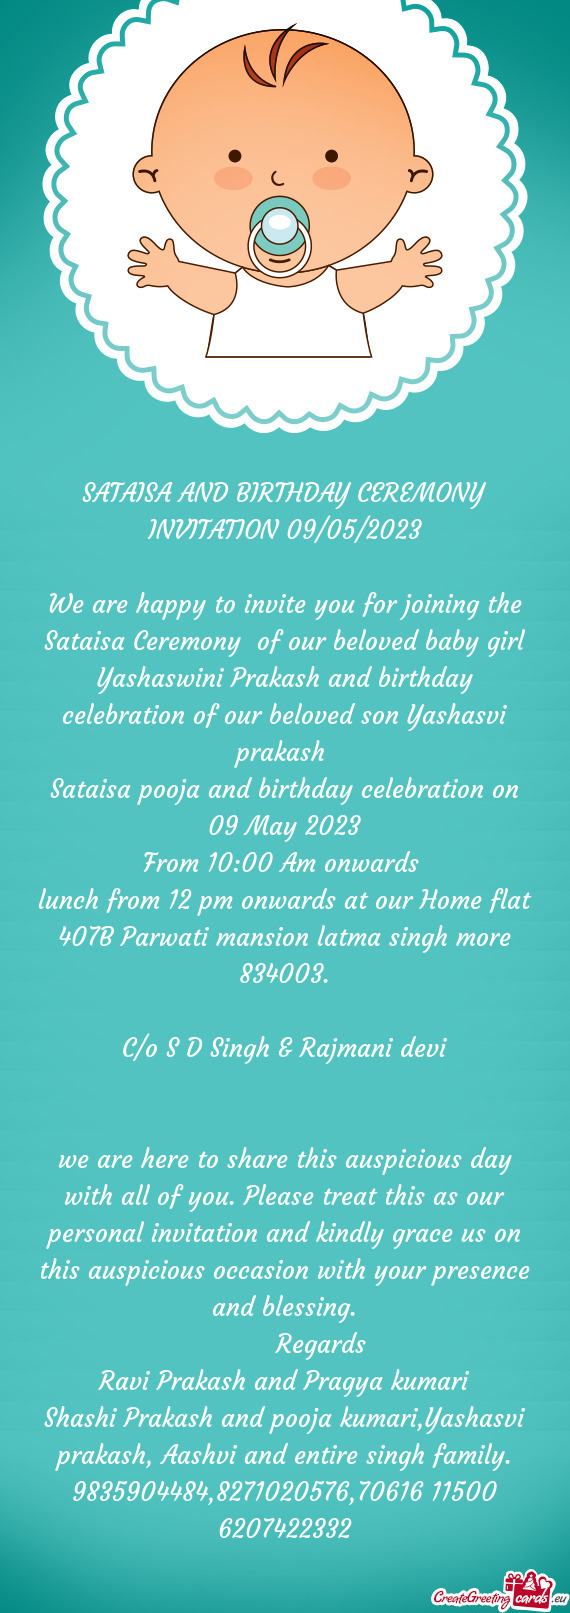 We are happy to invite you for joining the Sataisa Ceremony of our beloved baby girl Yashaswini Pra